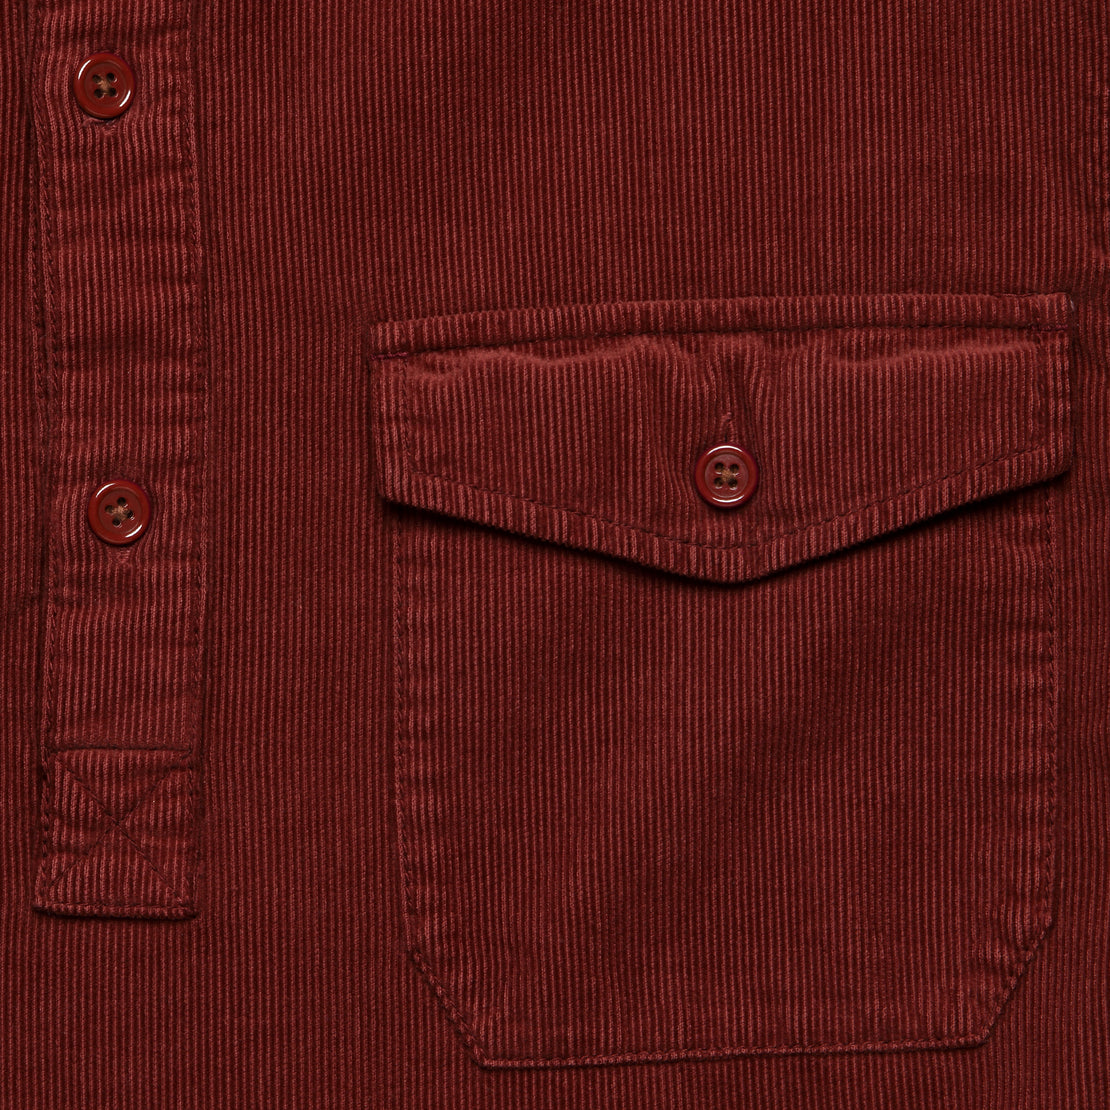 Popover Cord Shirt - Dark Currant - Alex Mill - STAG Provisions - Tops - L/S Woven - Corduroy